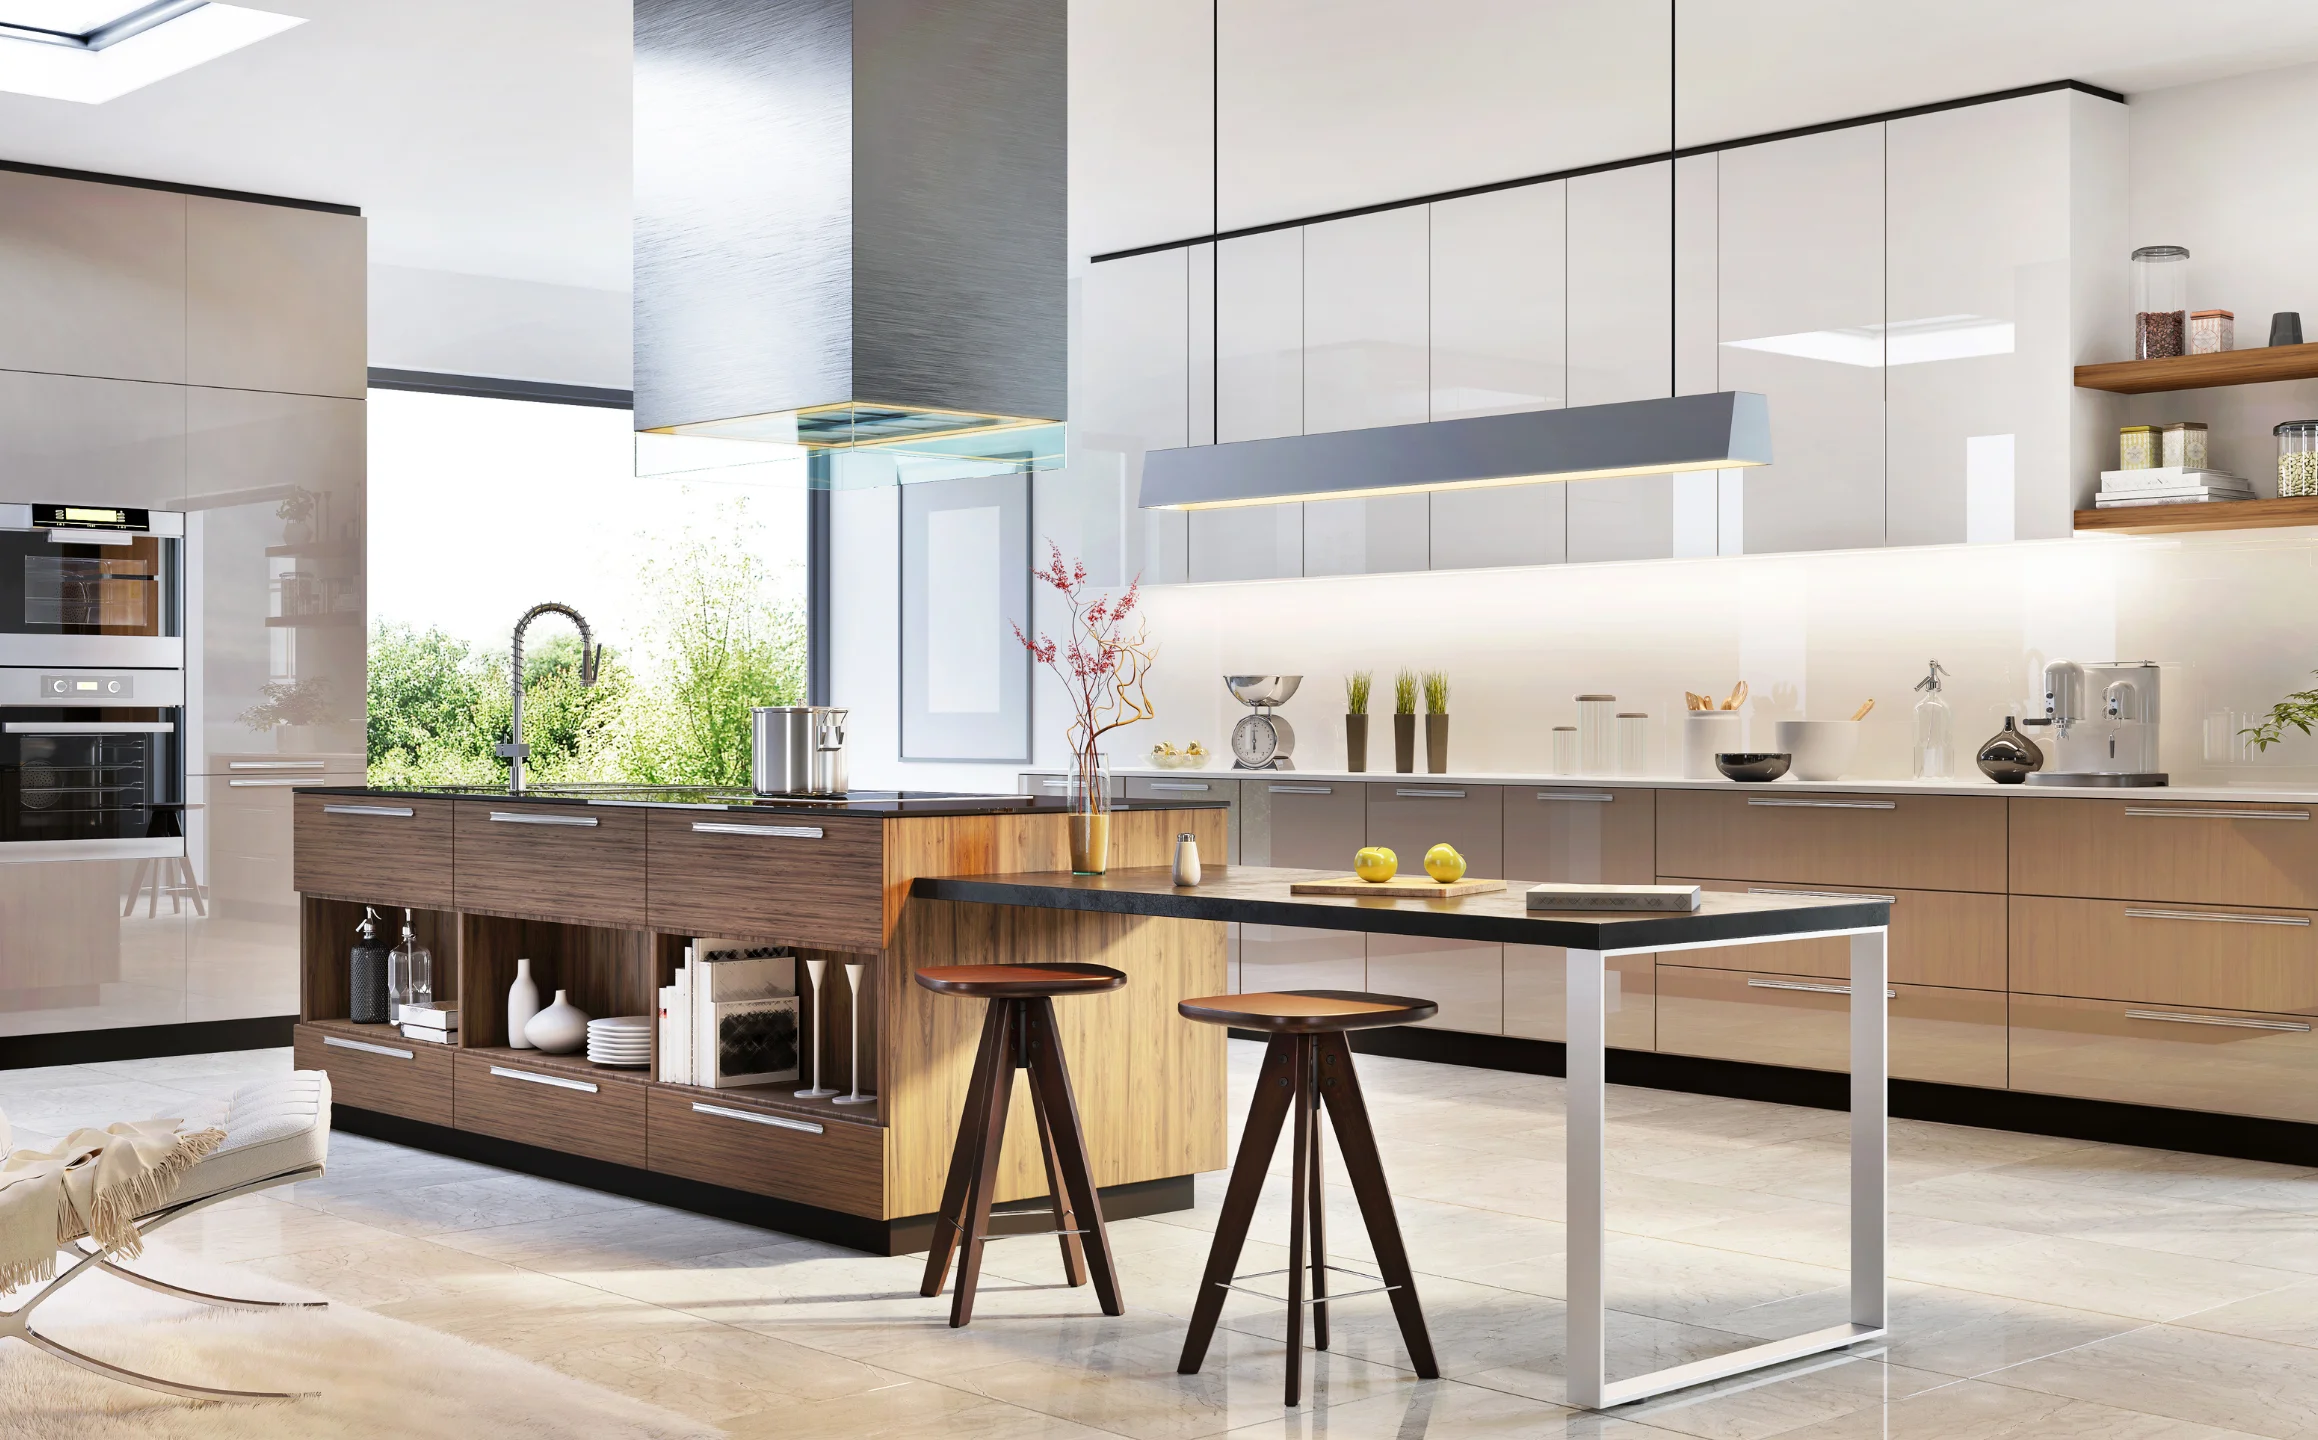 Luxury Kitchens: Where Elegance Meets Functionality